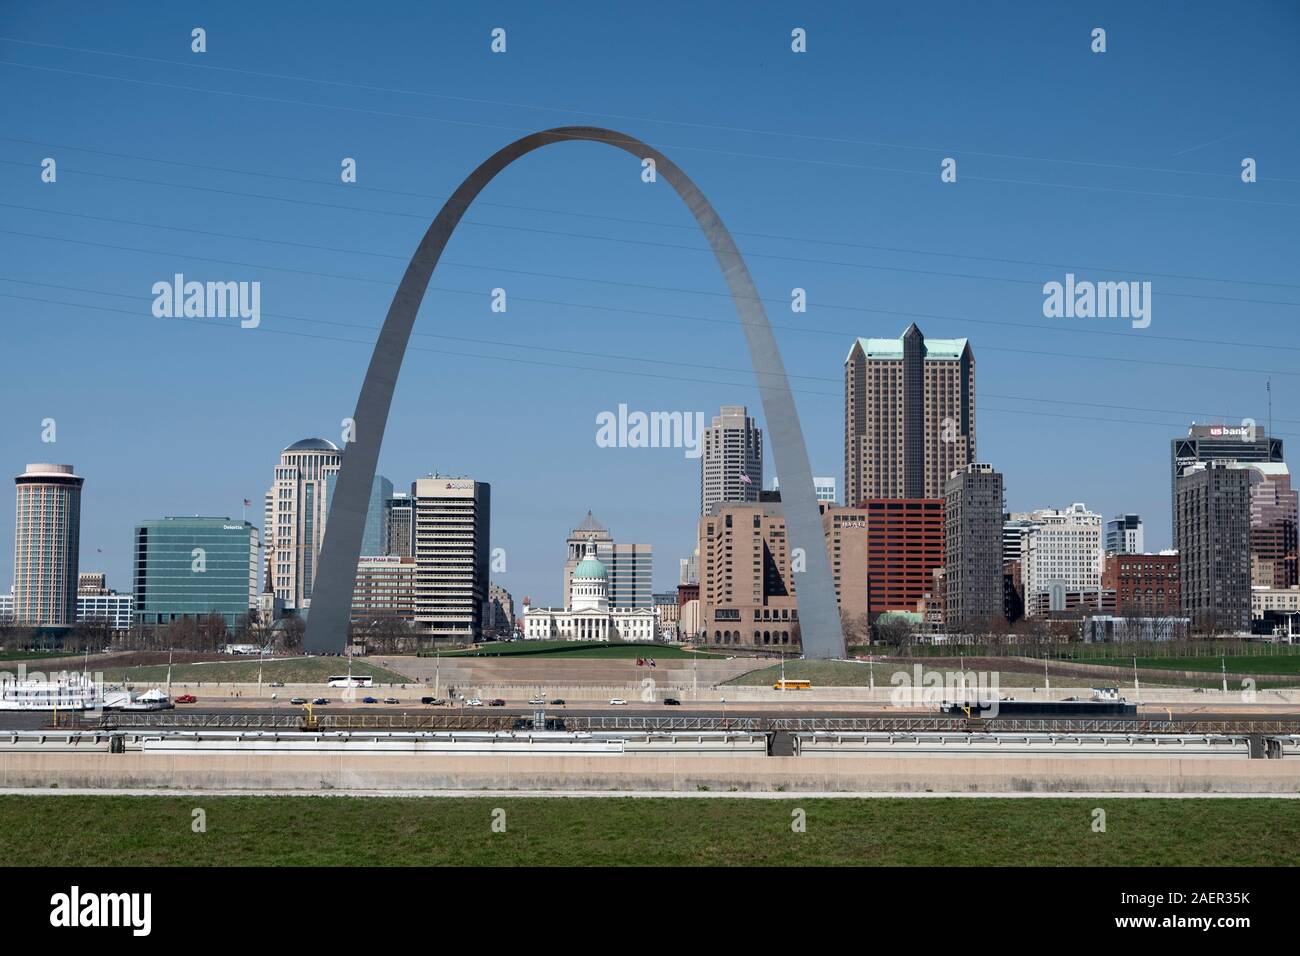 View of the St. Louis Arch from across the Mississippi River Stock Photo